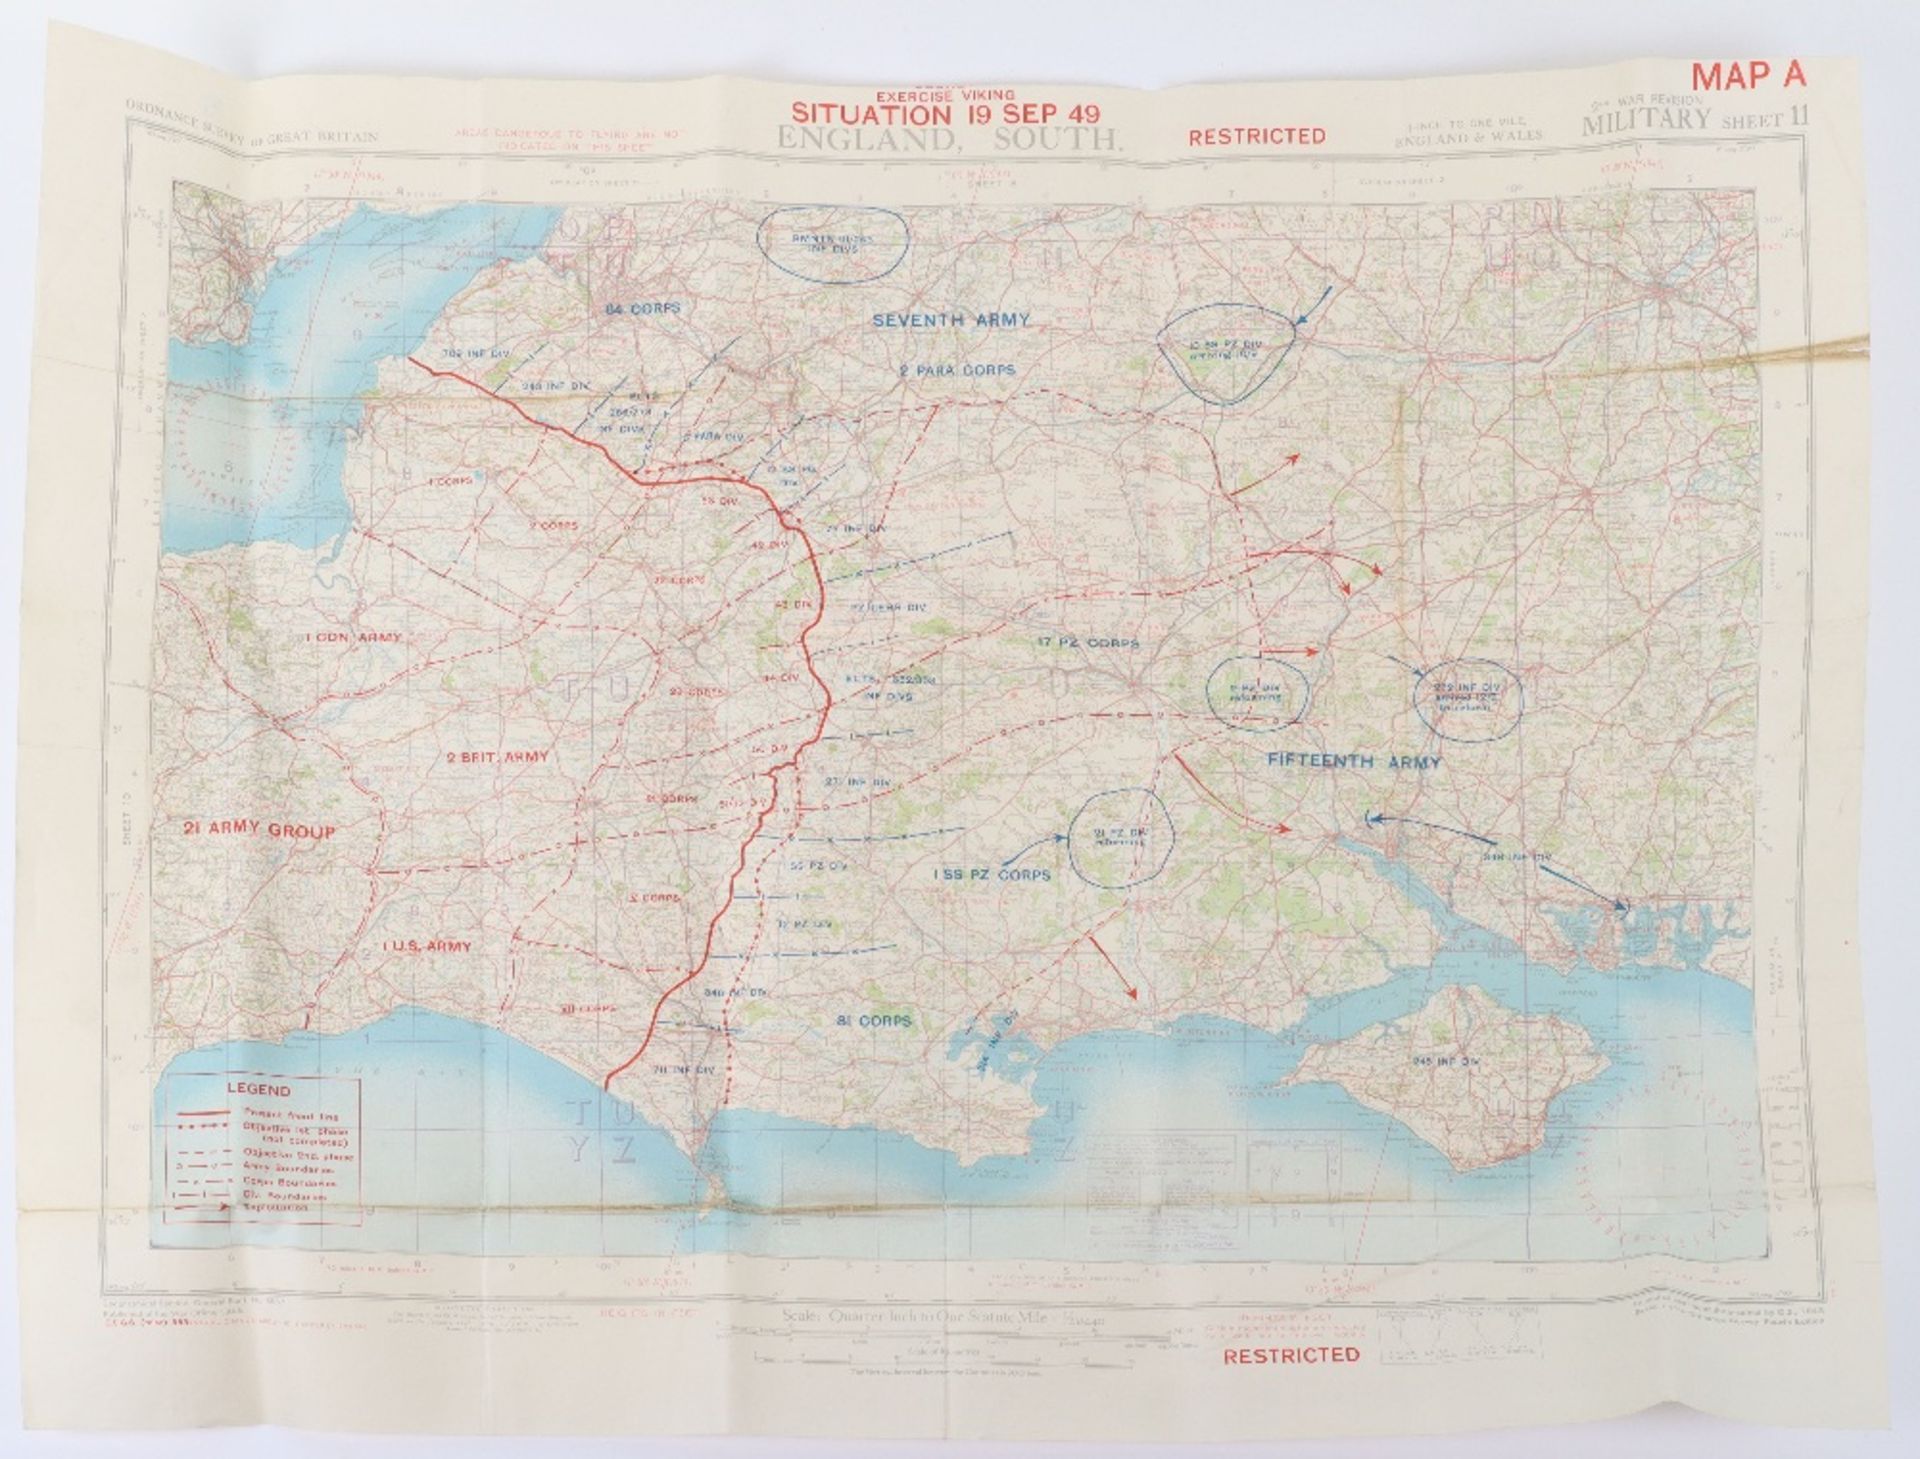 Interesting Maps for Exercise Viking, 23 Corps, Simulation of a German invasion of the UK